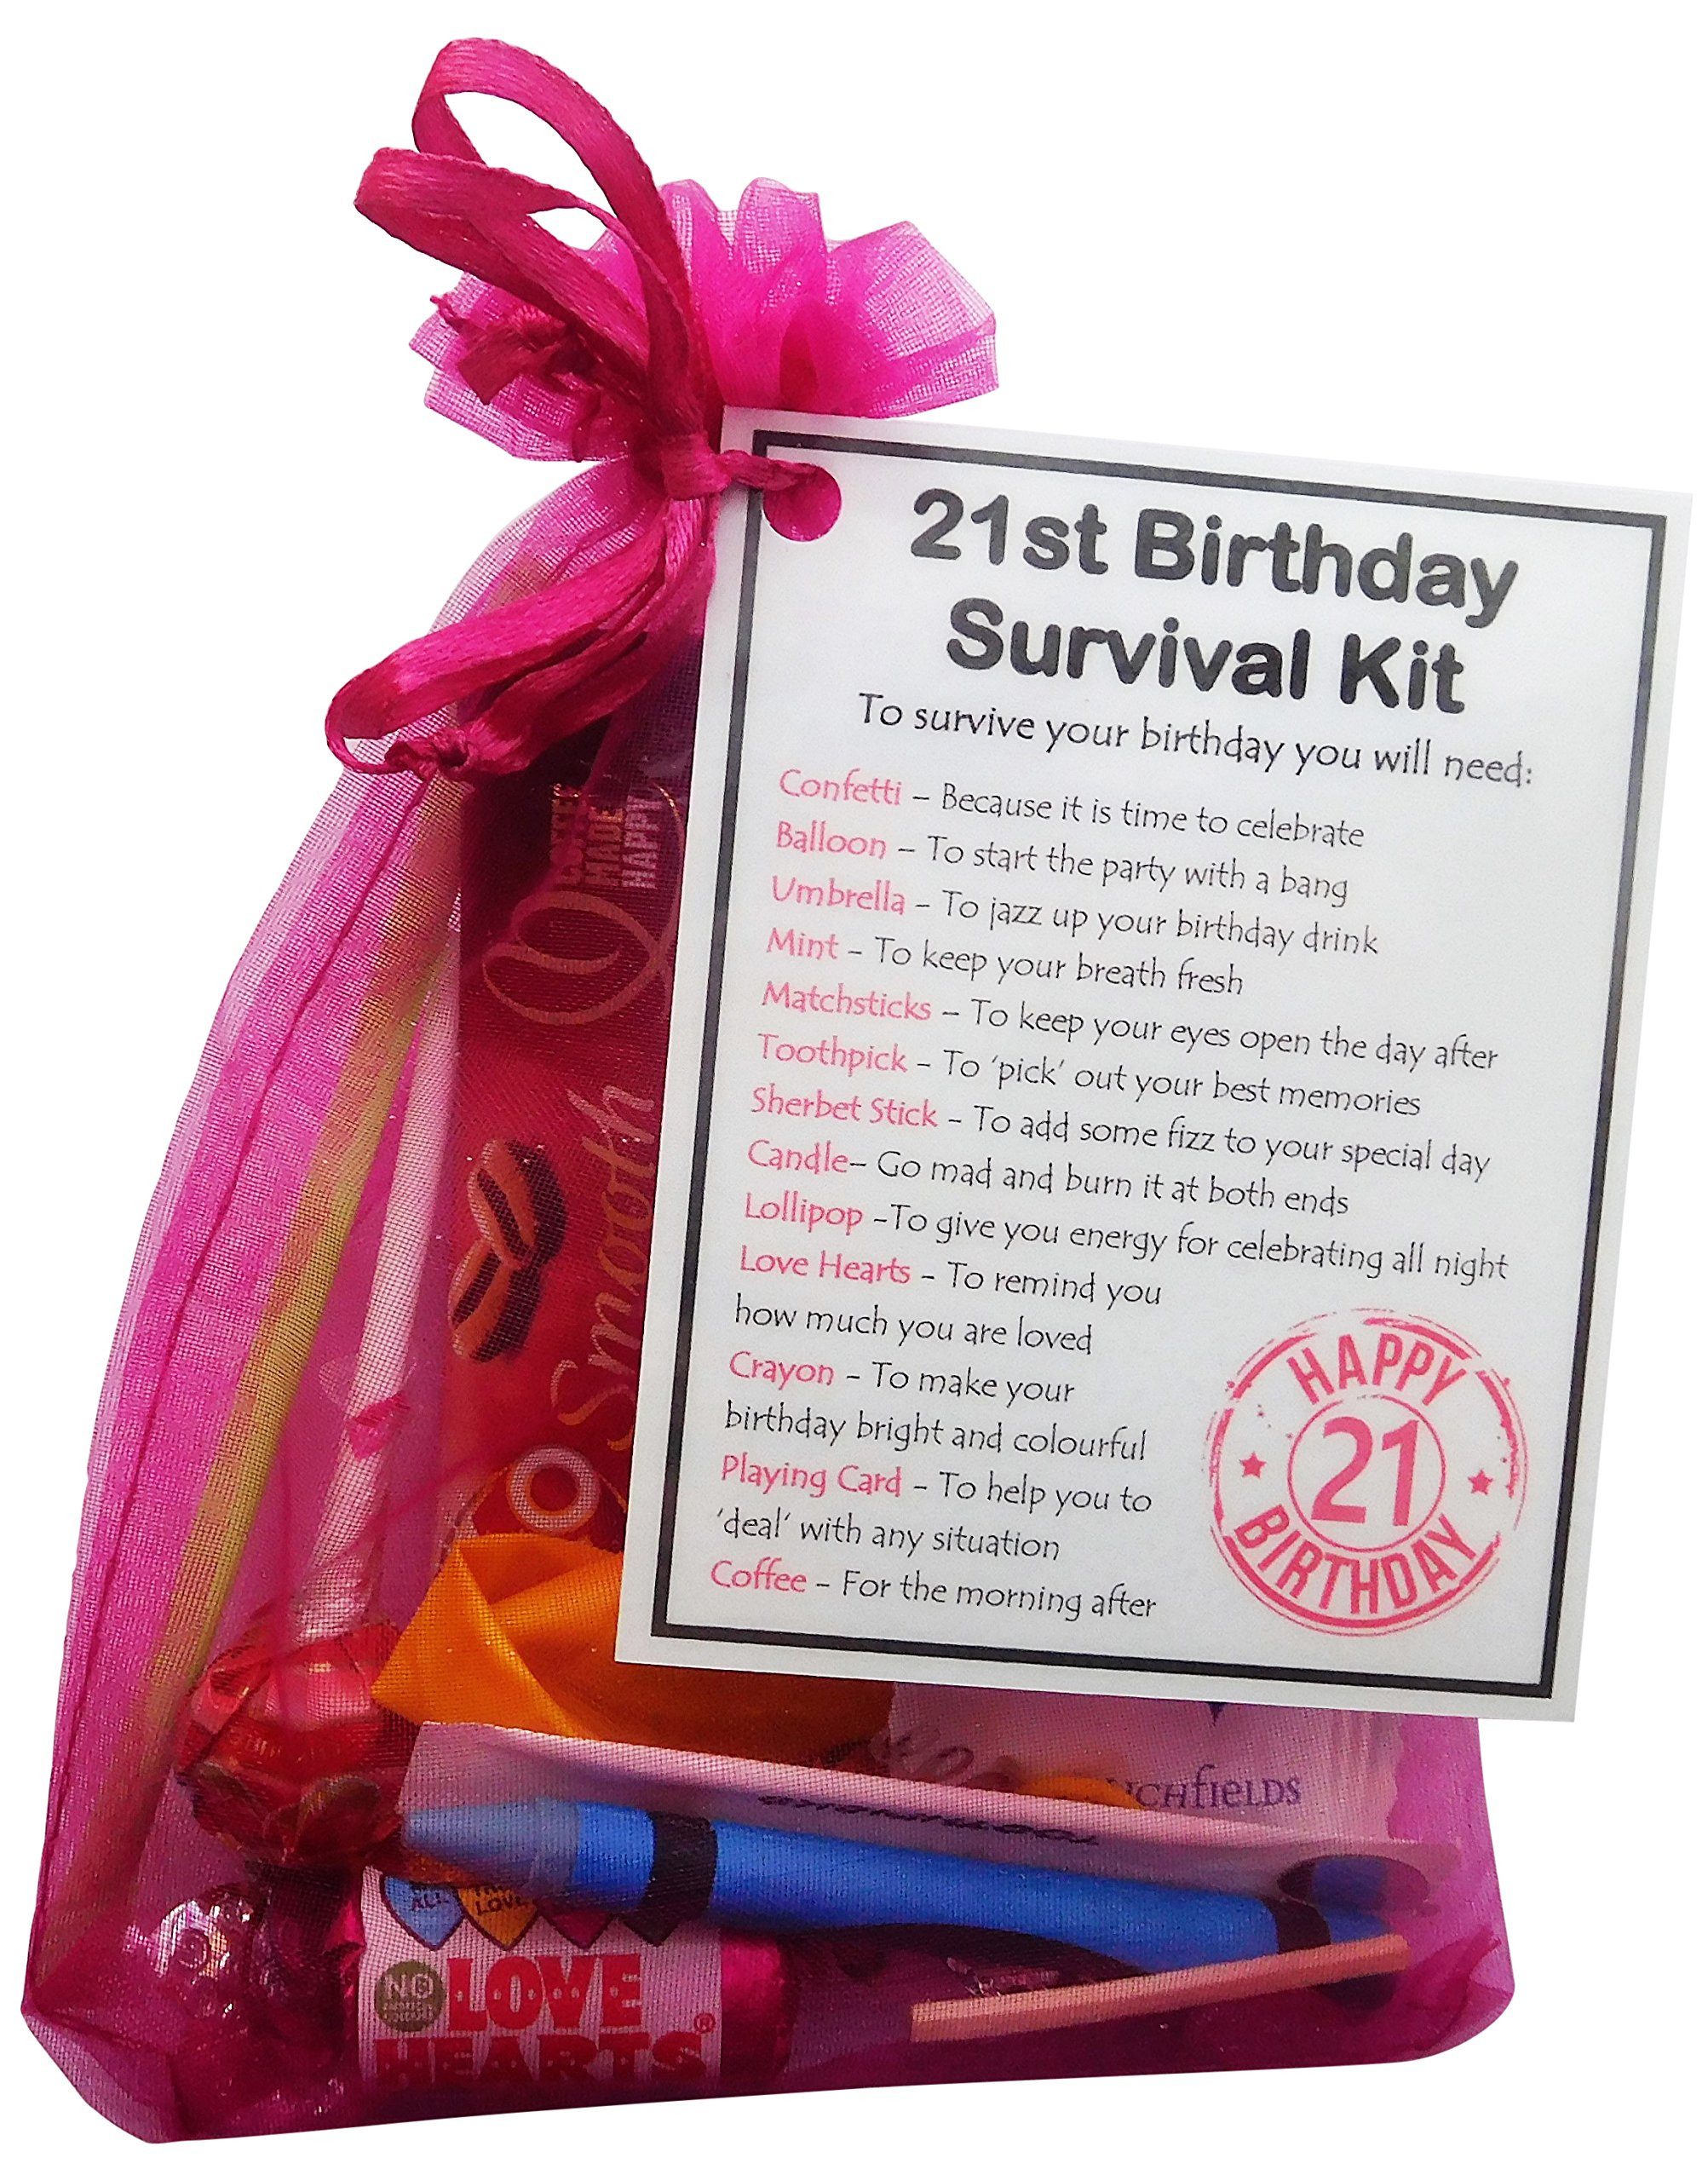 Fun Birthday Gifts For Her
 21st Birthday Gifts for Her Keepsake Amazon